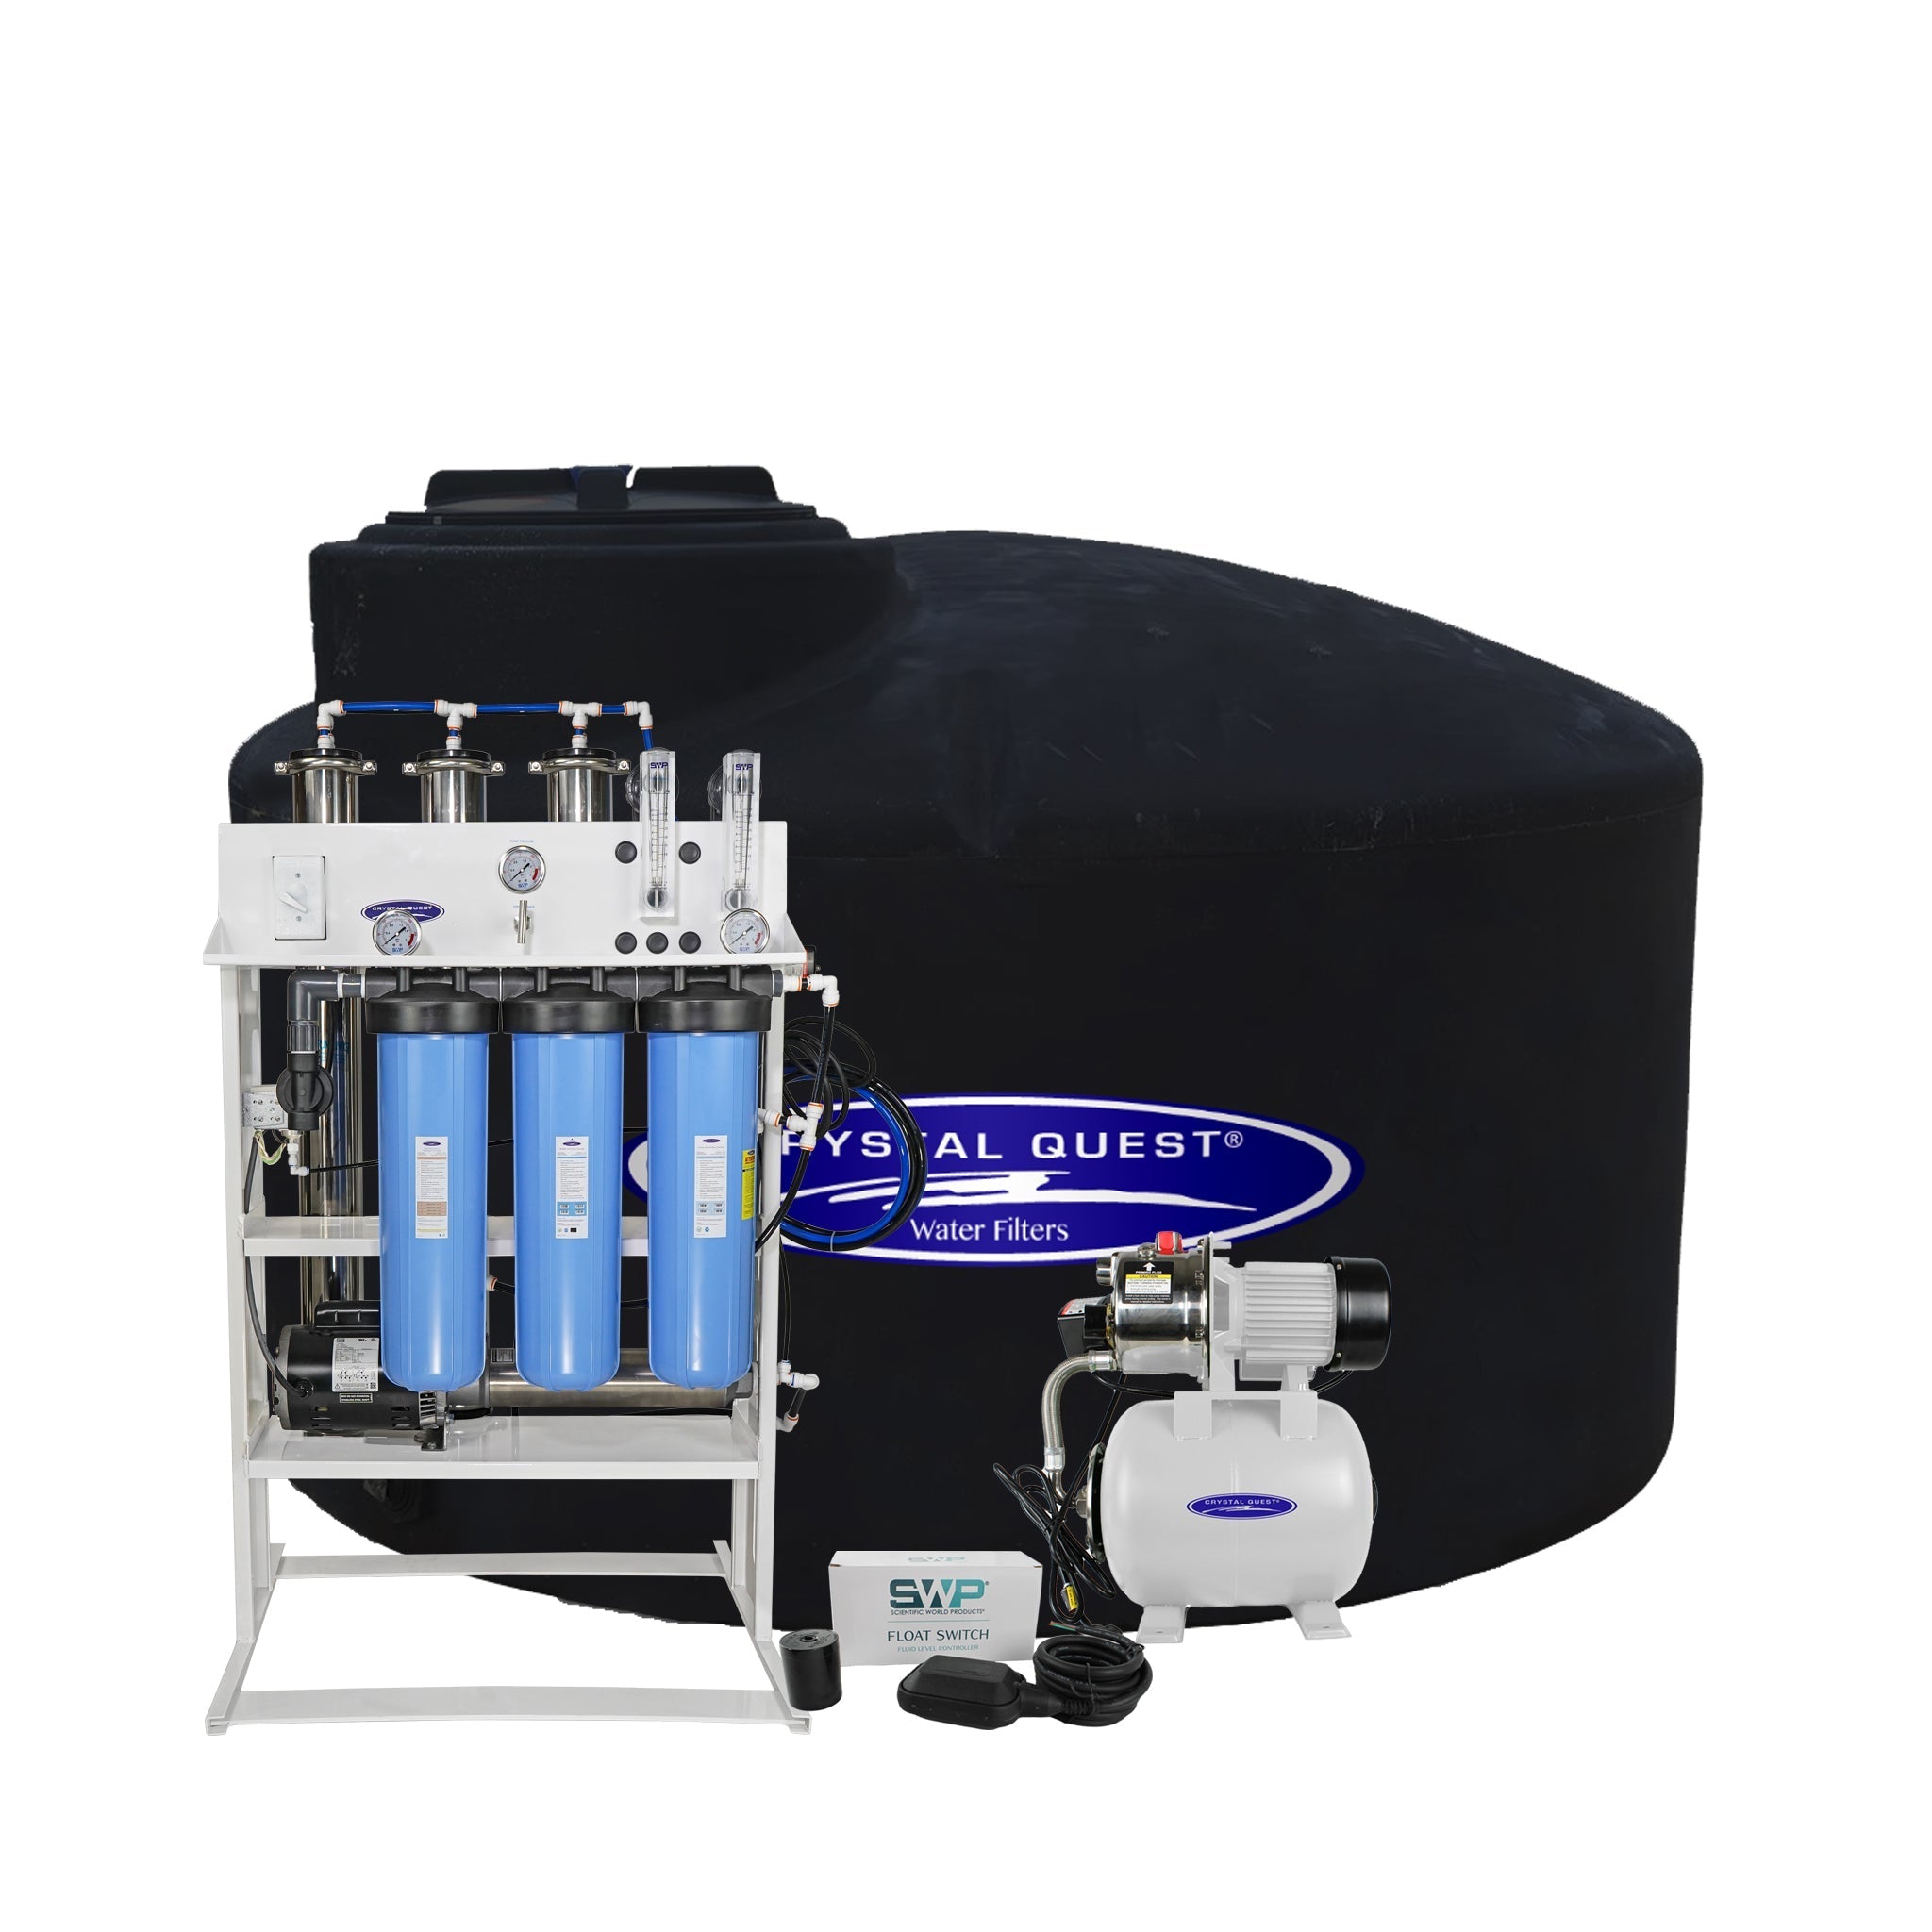 Crystal Quest Whole House Reverse Osmosis System 5000 GPD RO Pump and 550 Gallon Storage Tank